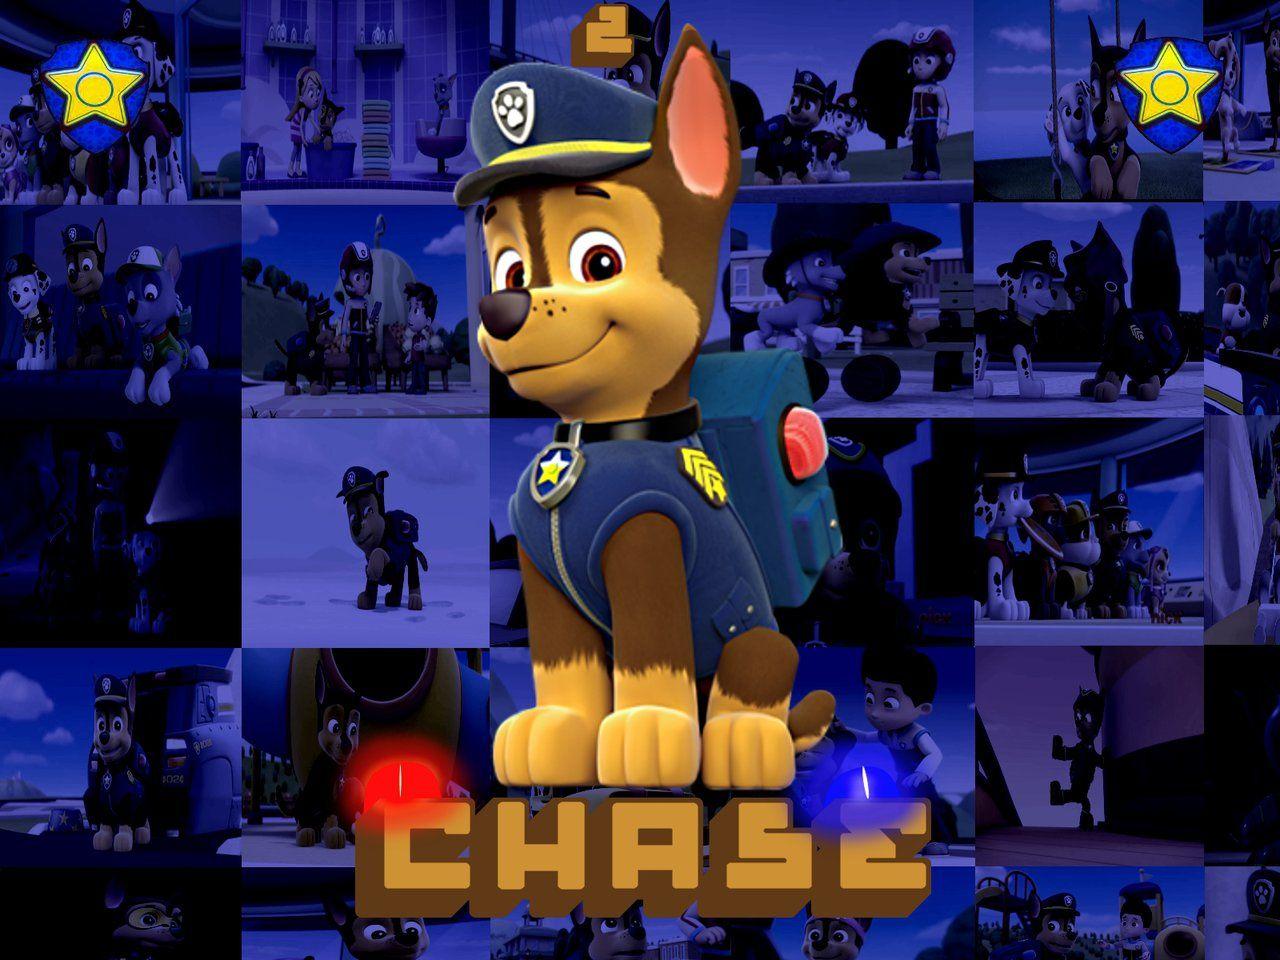 Chase Paw Patrol The Movie Wallpapers